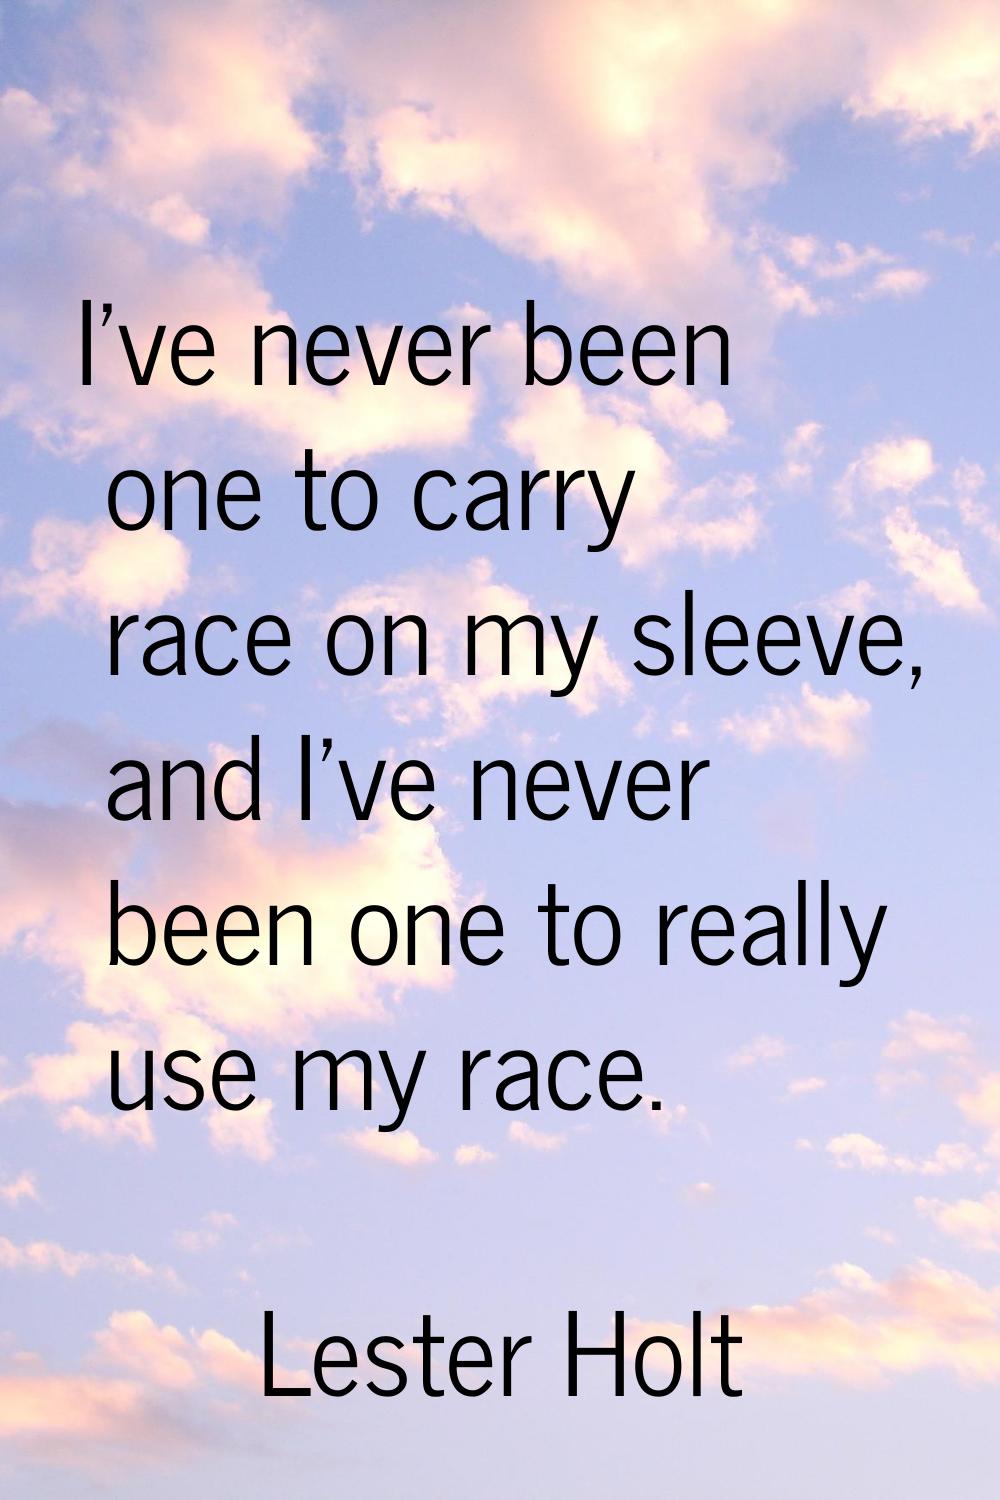 I've never been one to carry race on my sleeve, and I've never been one to really use my race.